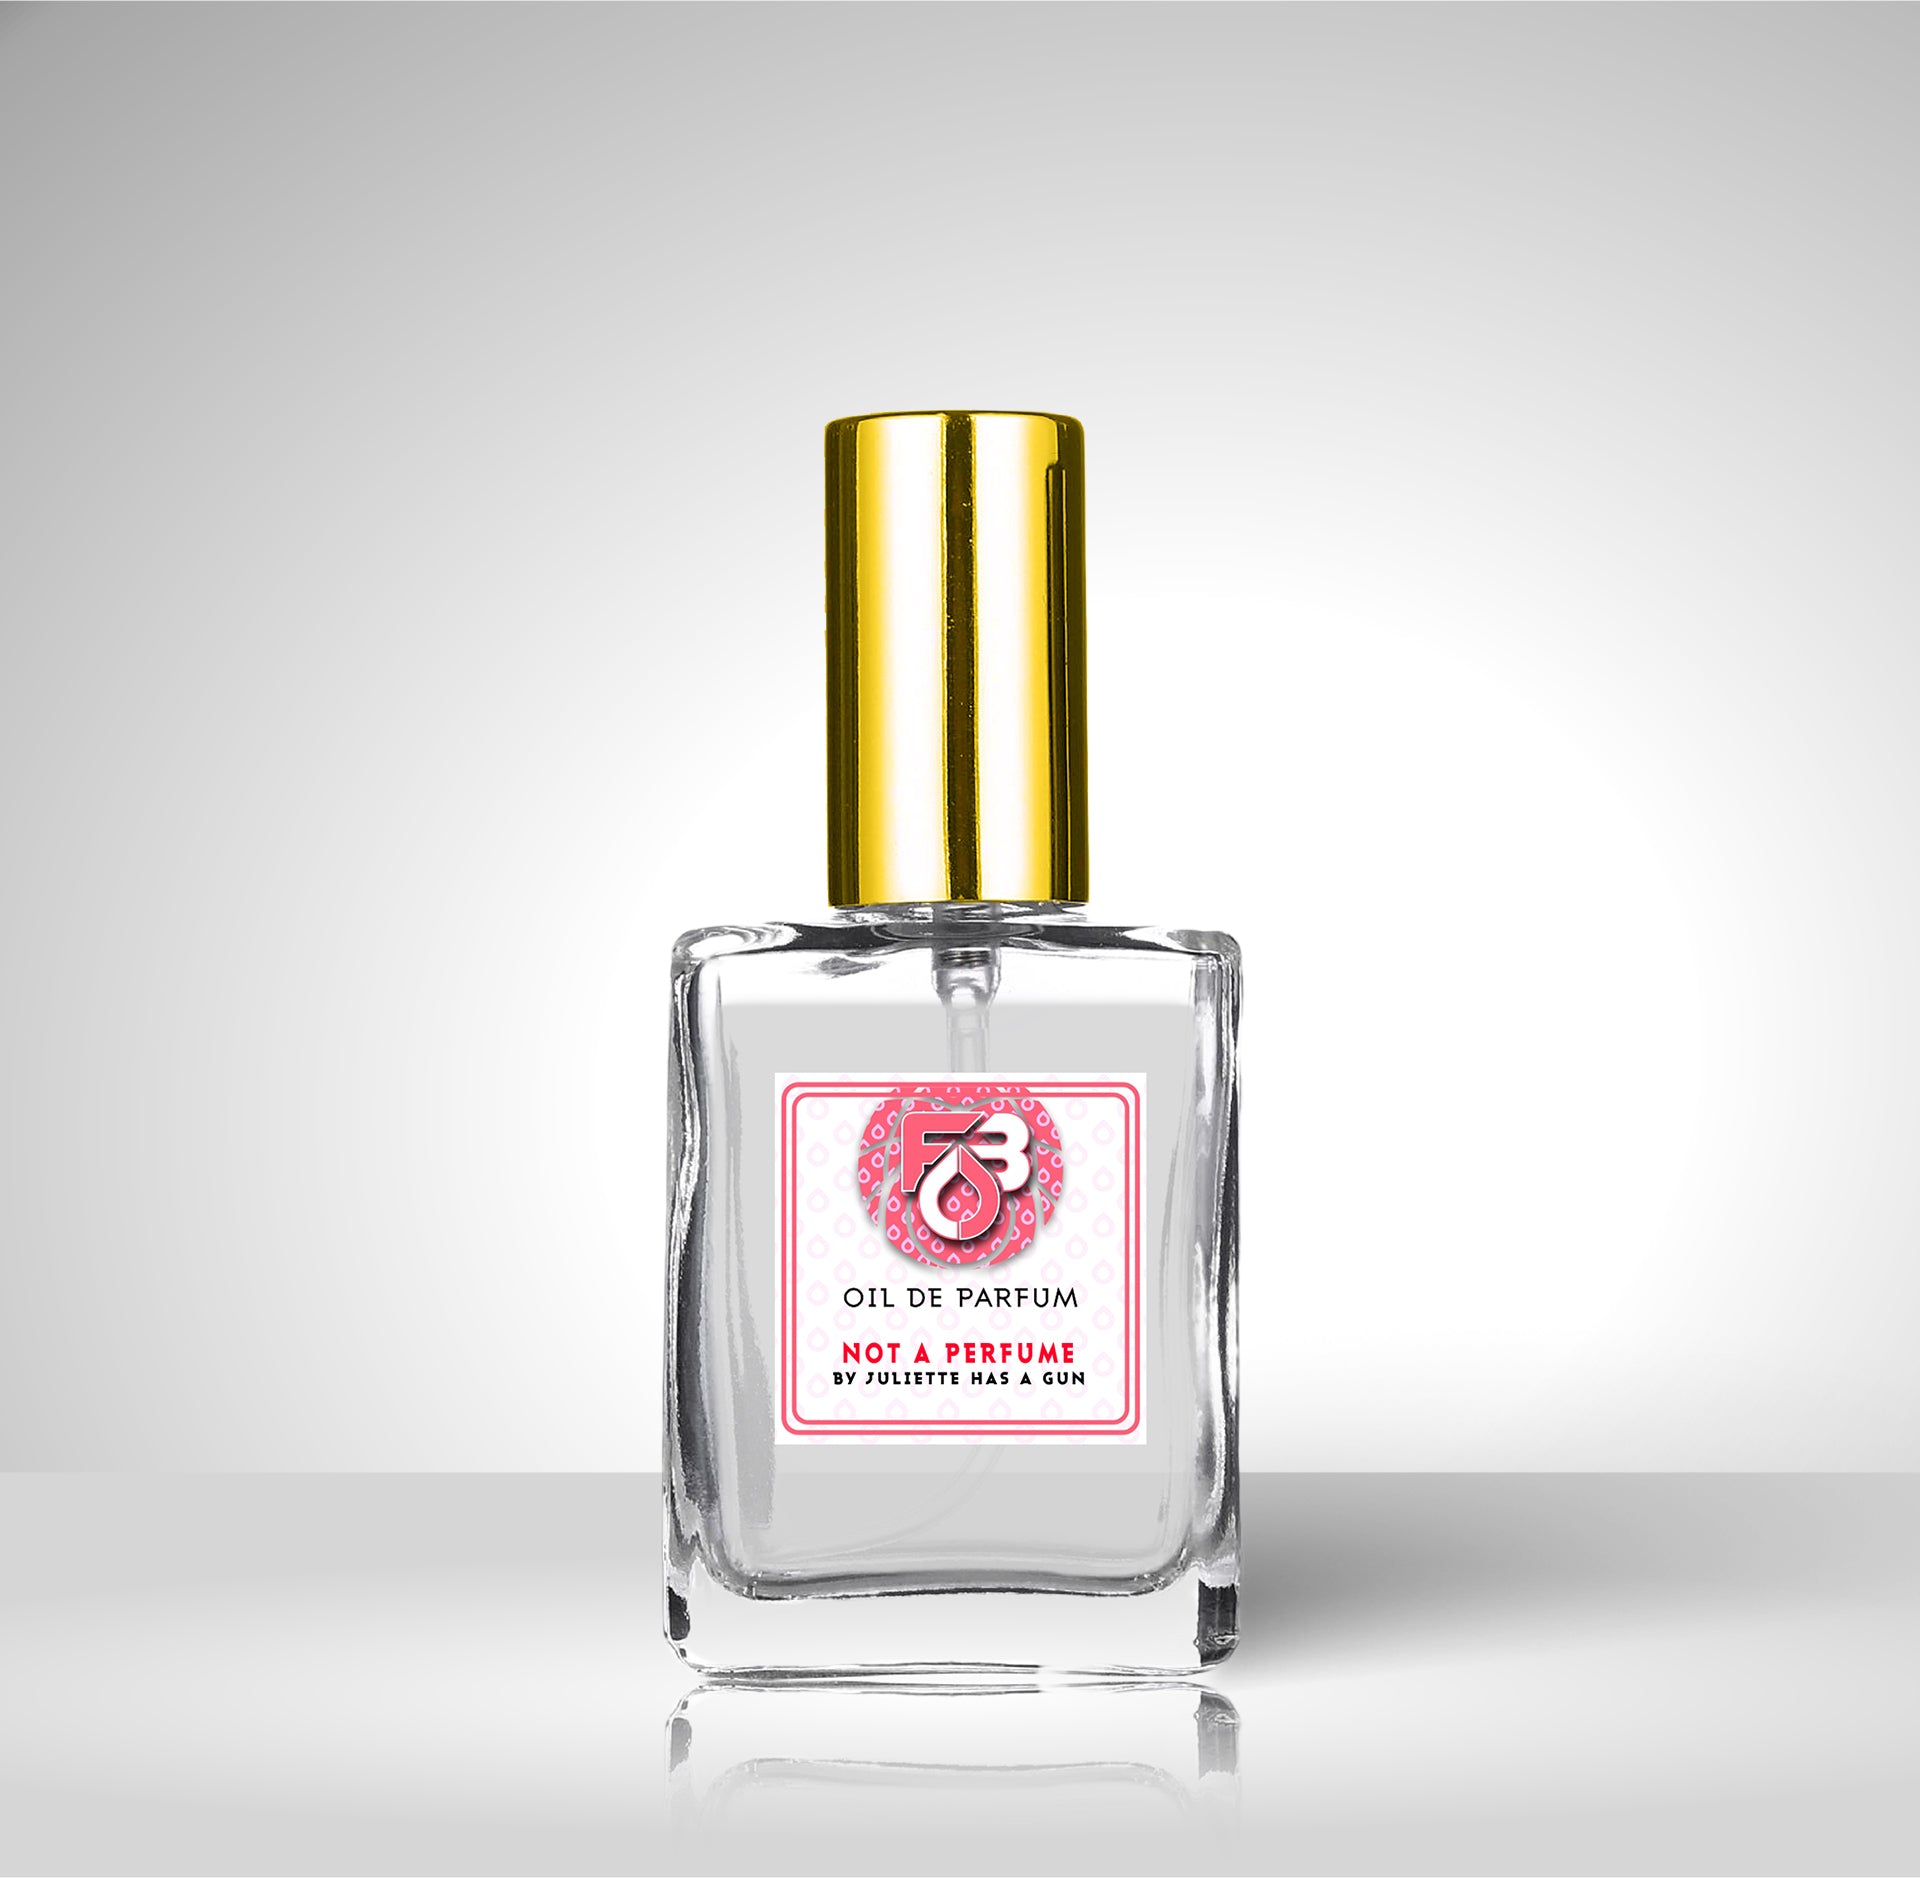 Compare Aroma To Not A Perfume®